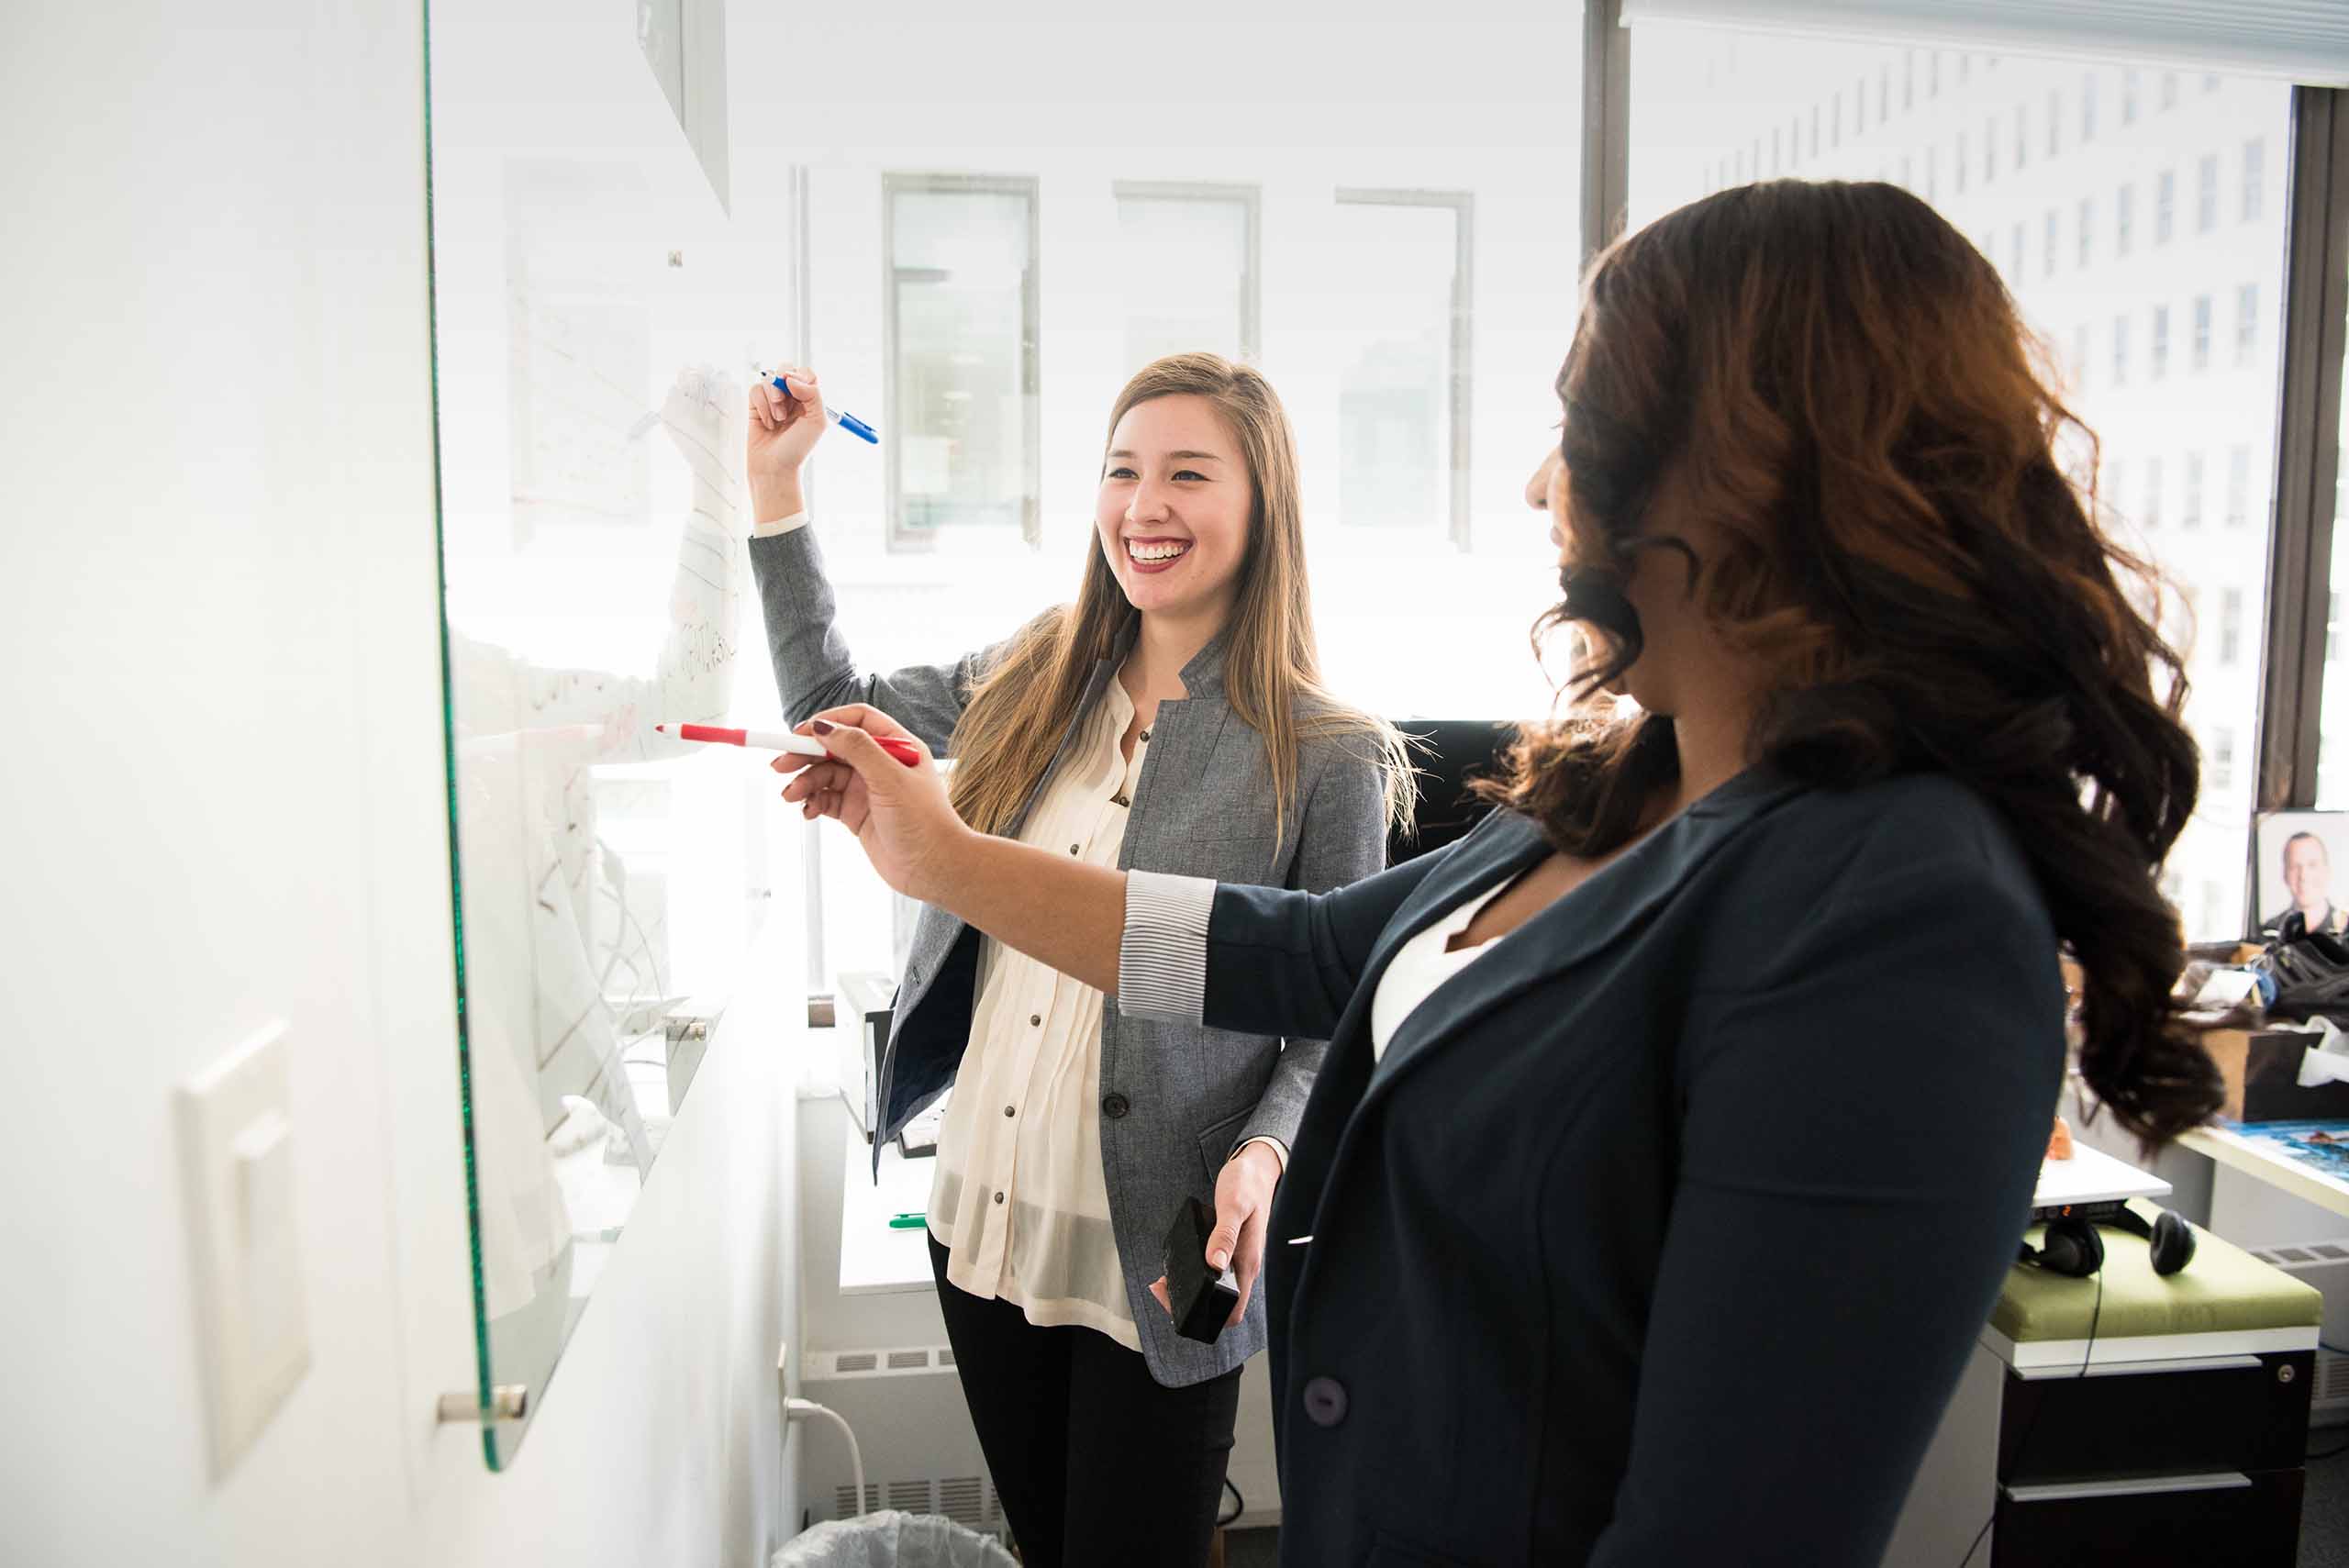 Two women writing on a dry erase whiteboard in an office setting.